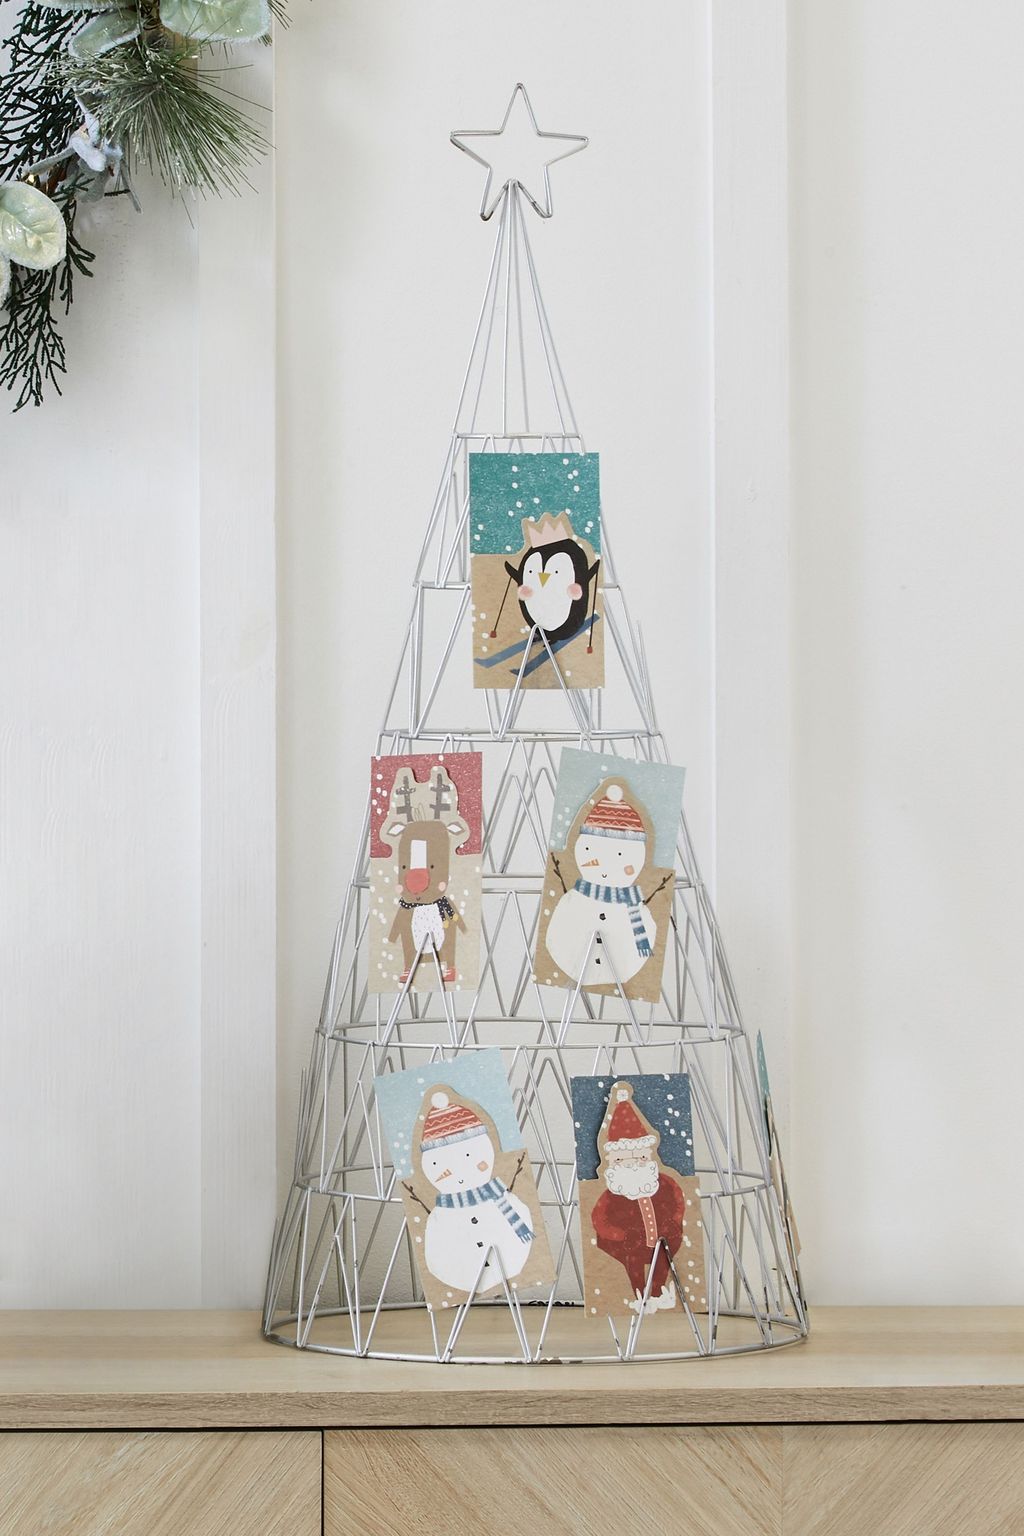 8 Next Christmas decorations that you NEED in your home this winter